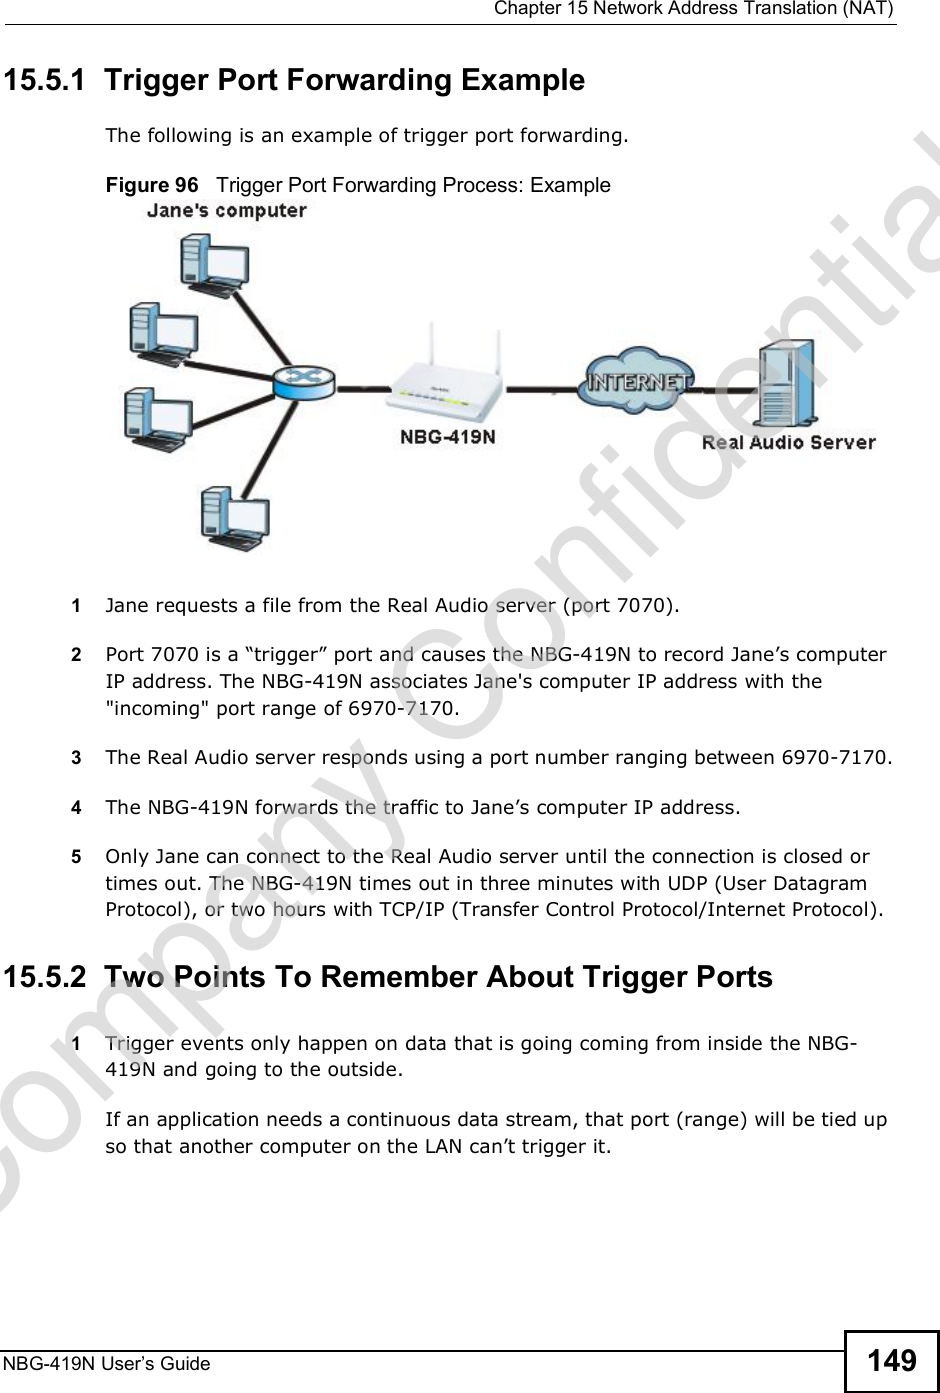  Chapter 15Network Address Translation (NAT)NBG-419N User s Guide 14915.5.1  Trigger Port Forwarding Example The following is an example of trigger port forwarding.Figure 96   Trigger Port Forwarding Process: Example1Jane requests a file from the Real Audio server (port 7070).2Port 7070 is a &quot;trigger# port and causes the NBG-419N to record Jane!s computer IP address. The NBG-419N associates Jane&apos;s computer IP address with the &quot;incoming&quot; port range of 6970-7170.3The Real Audio server responds using a port number ranging between 6970-7170.4The NBG-419N forwards the traffic to Jane!s computer IP address. 5Only Jane can connect to the Real Audio server until the connection is closed or times out. The NBG-419N times out in three minutes with UDP (User Datagram Protocol), or two hours with TCP/IP (Transfer Control Protocol/Internet Protocol). 15.5.2  Two Points To Remember About Trigger Ports1Trigger events only happen on data that is going coming from inside the NBG-419N and going to the outside.If an application needs a continuous data stream, that port (range) will be tied up so that another computer on the LAN can!t trigger it.Company Confidential